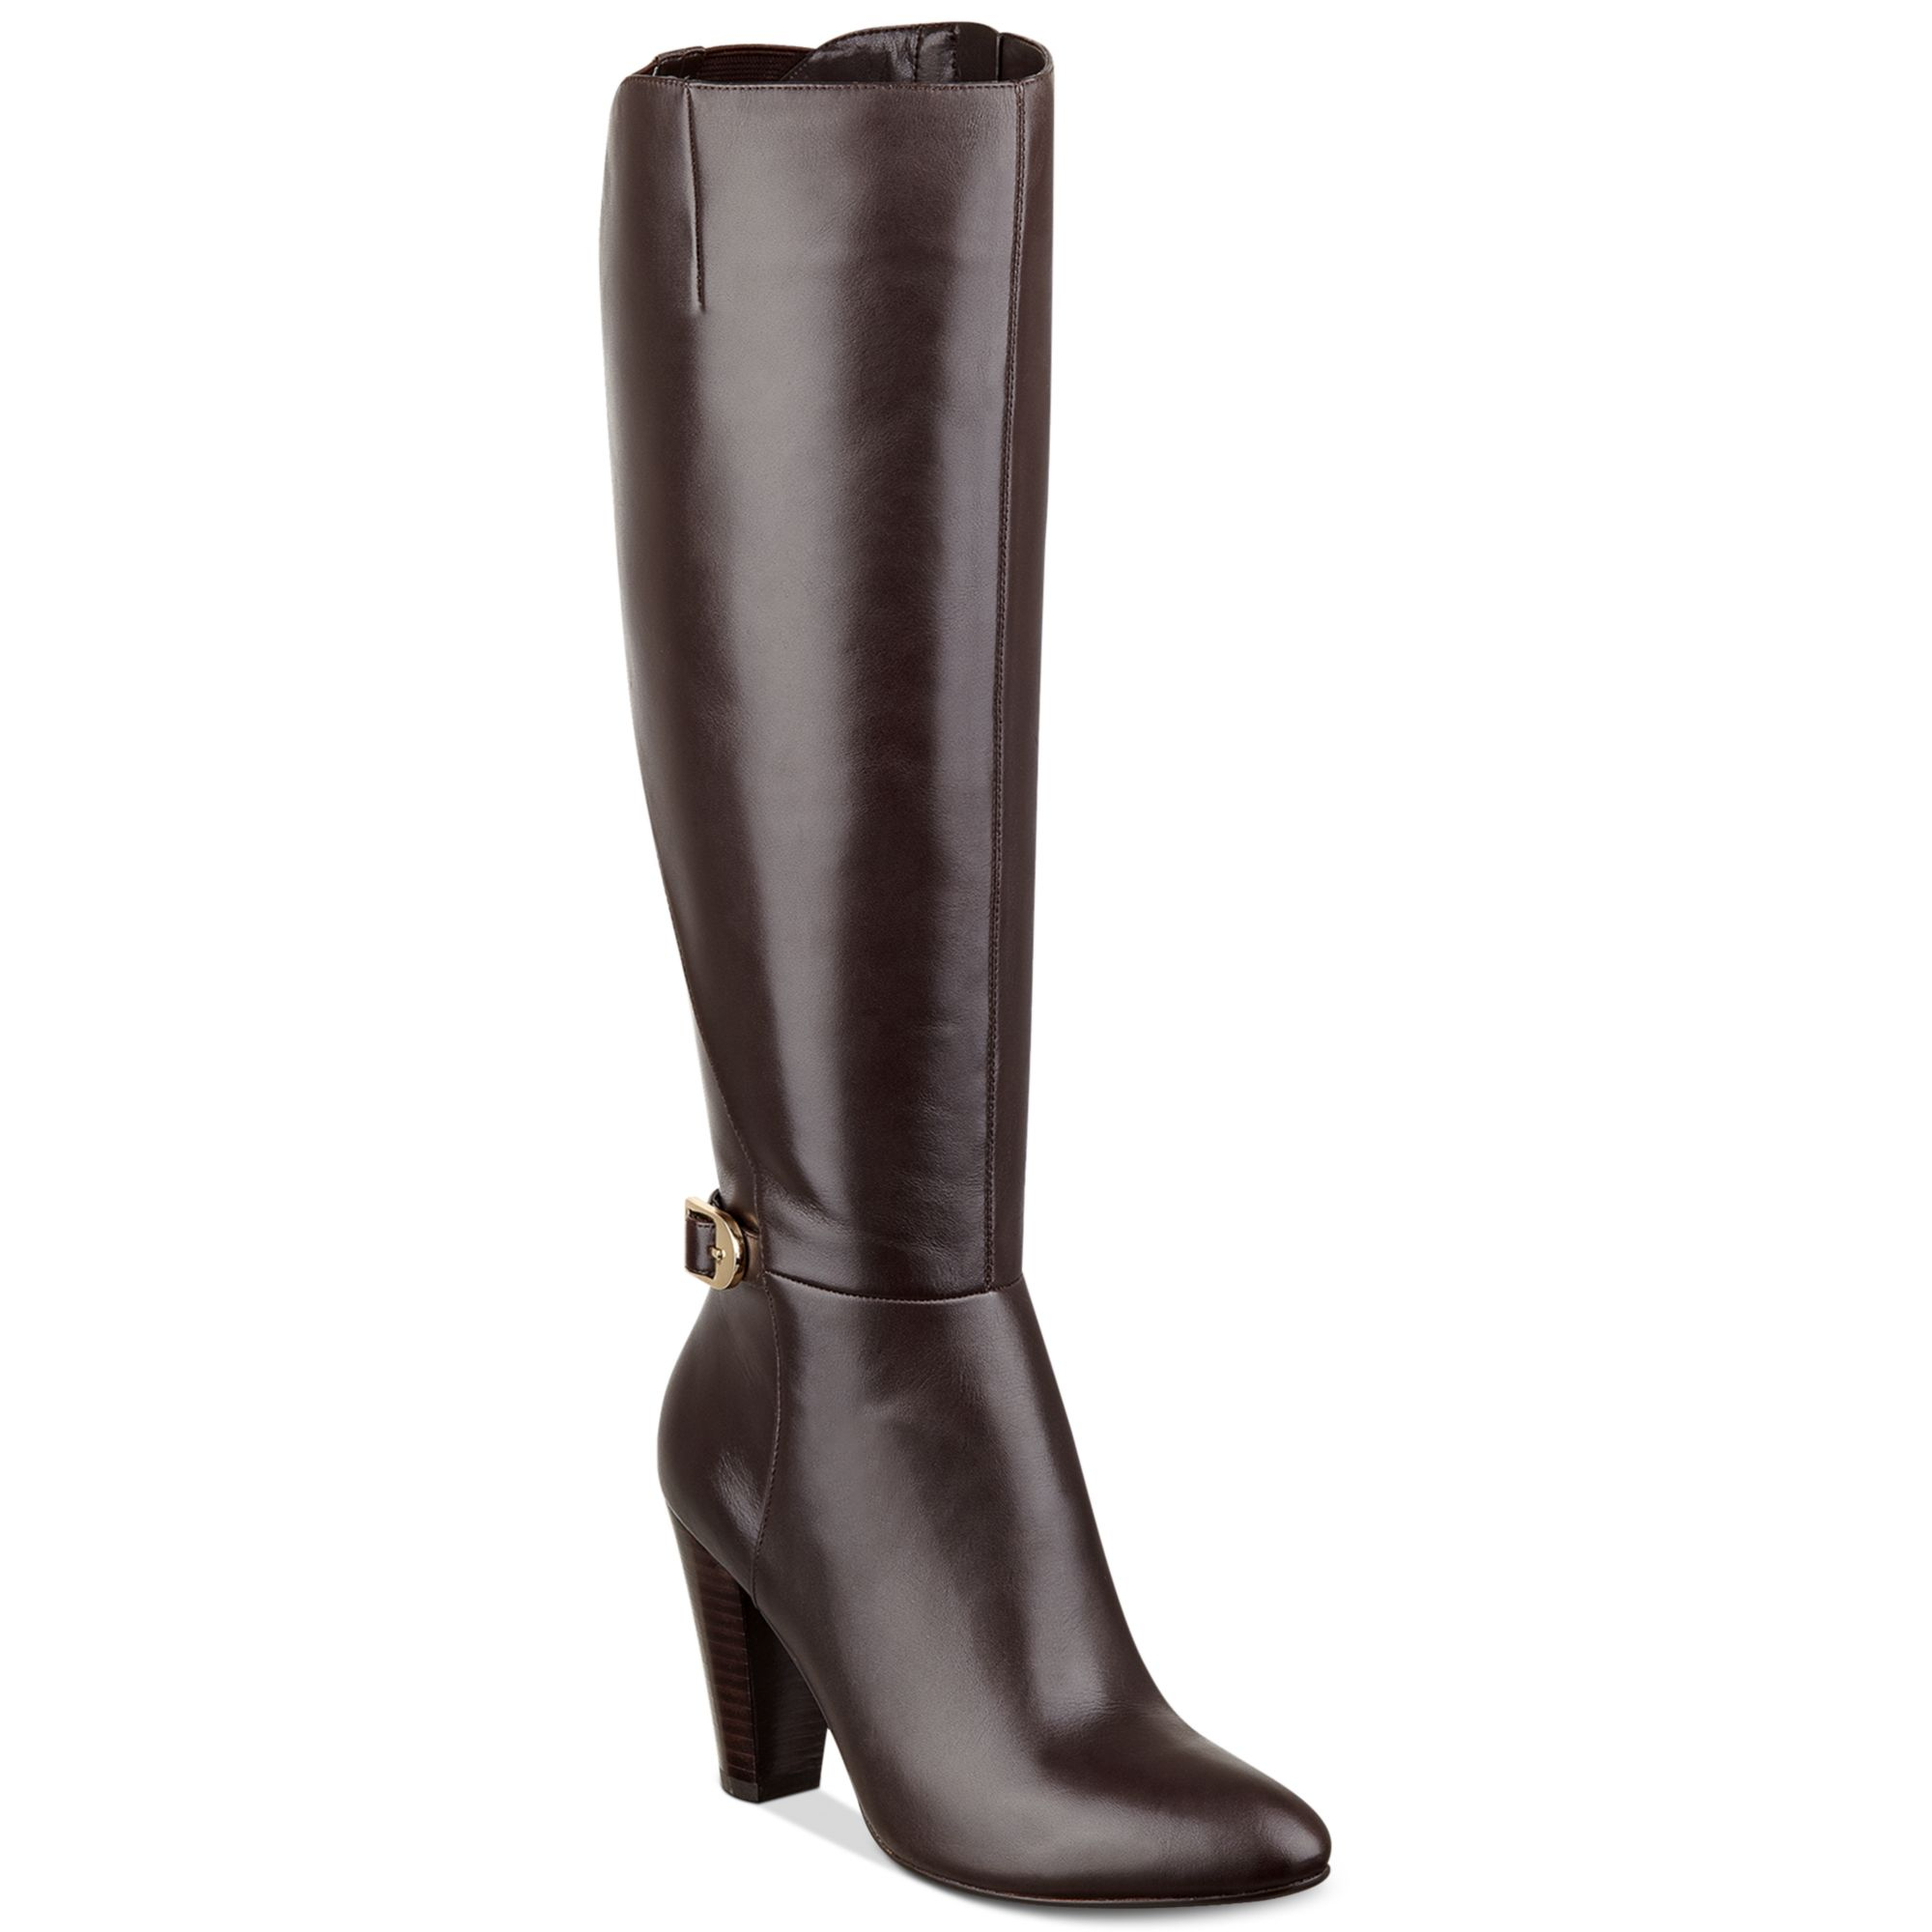 Lyst - Marc Fisher Shayna Tall Dress Boots in Brown